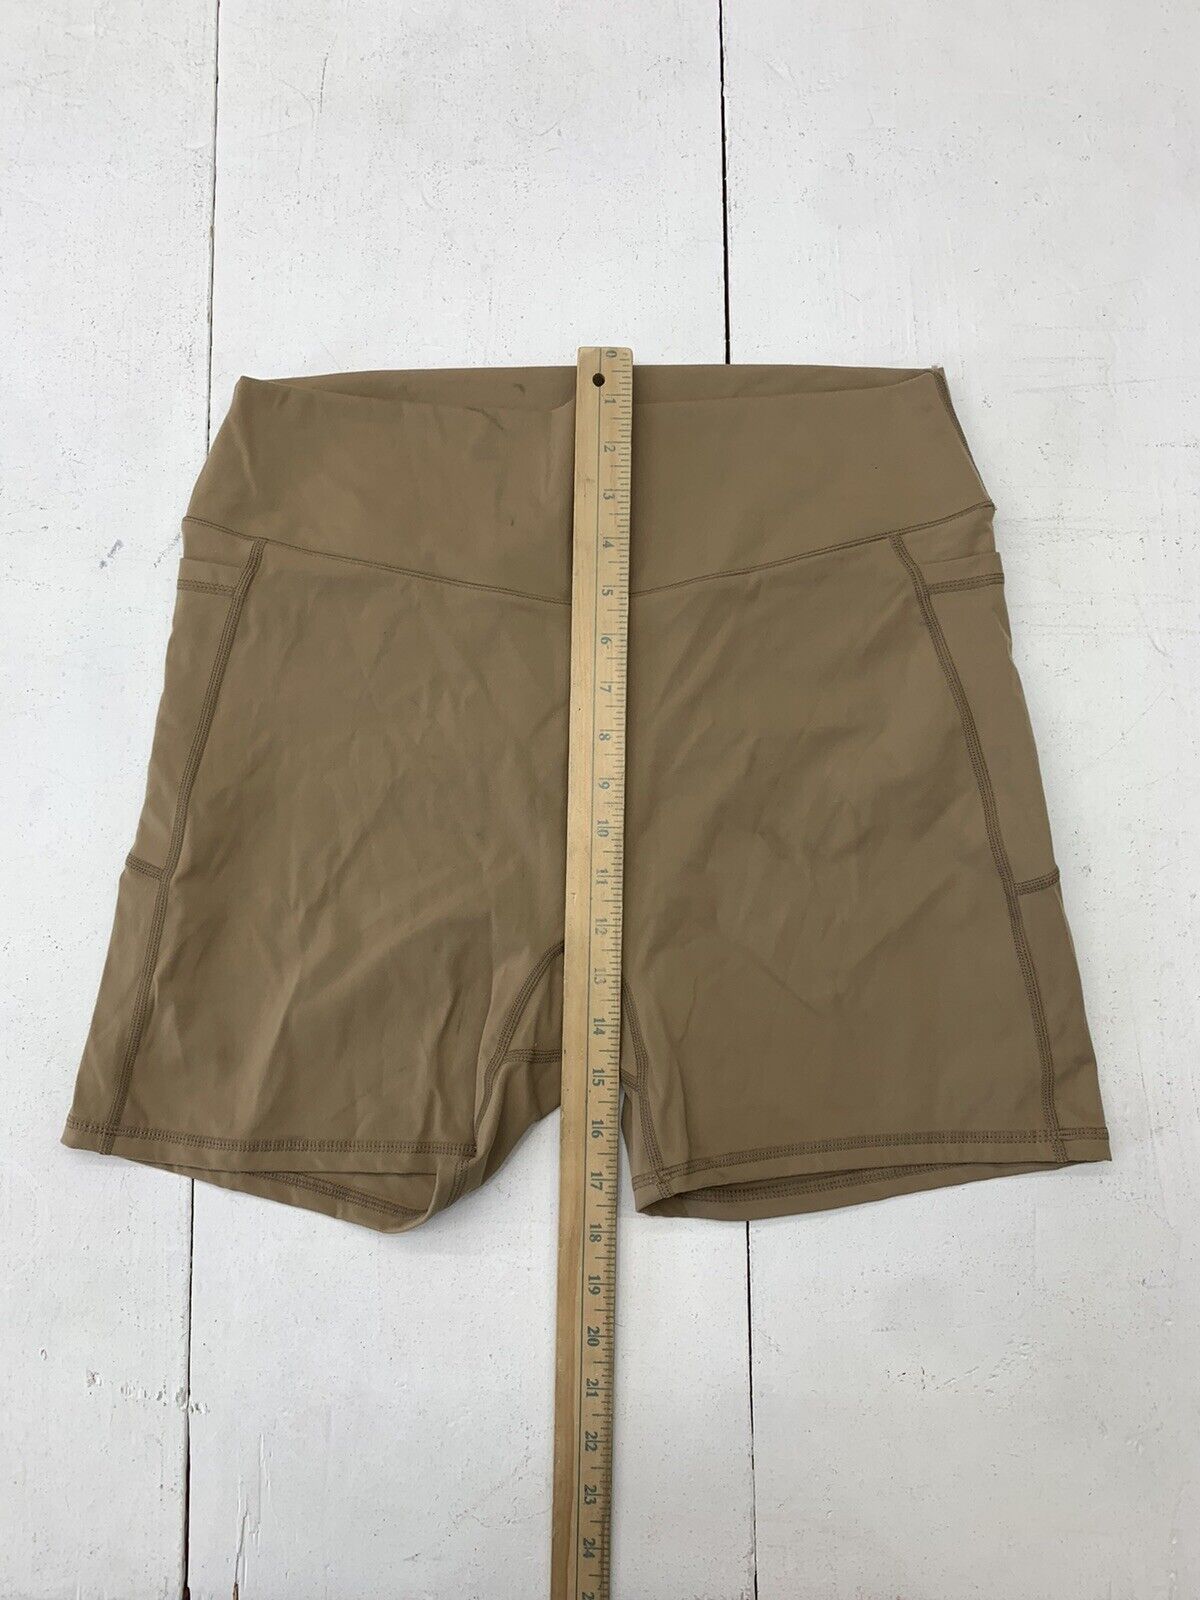 Sunzel Womens Brown Athletic Shorts Size 2XL - beyond exchange